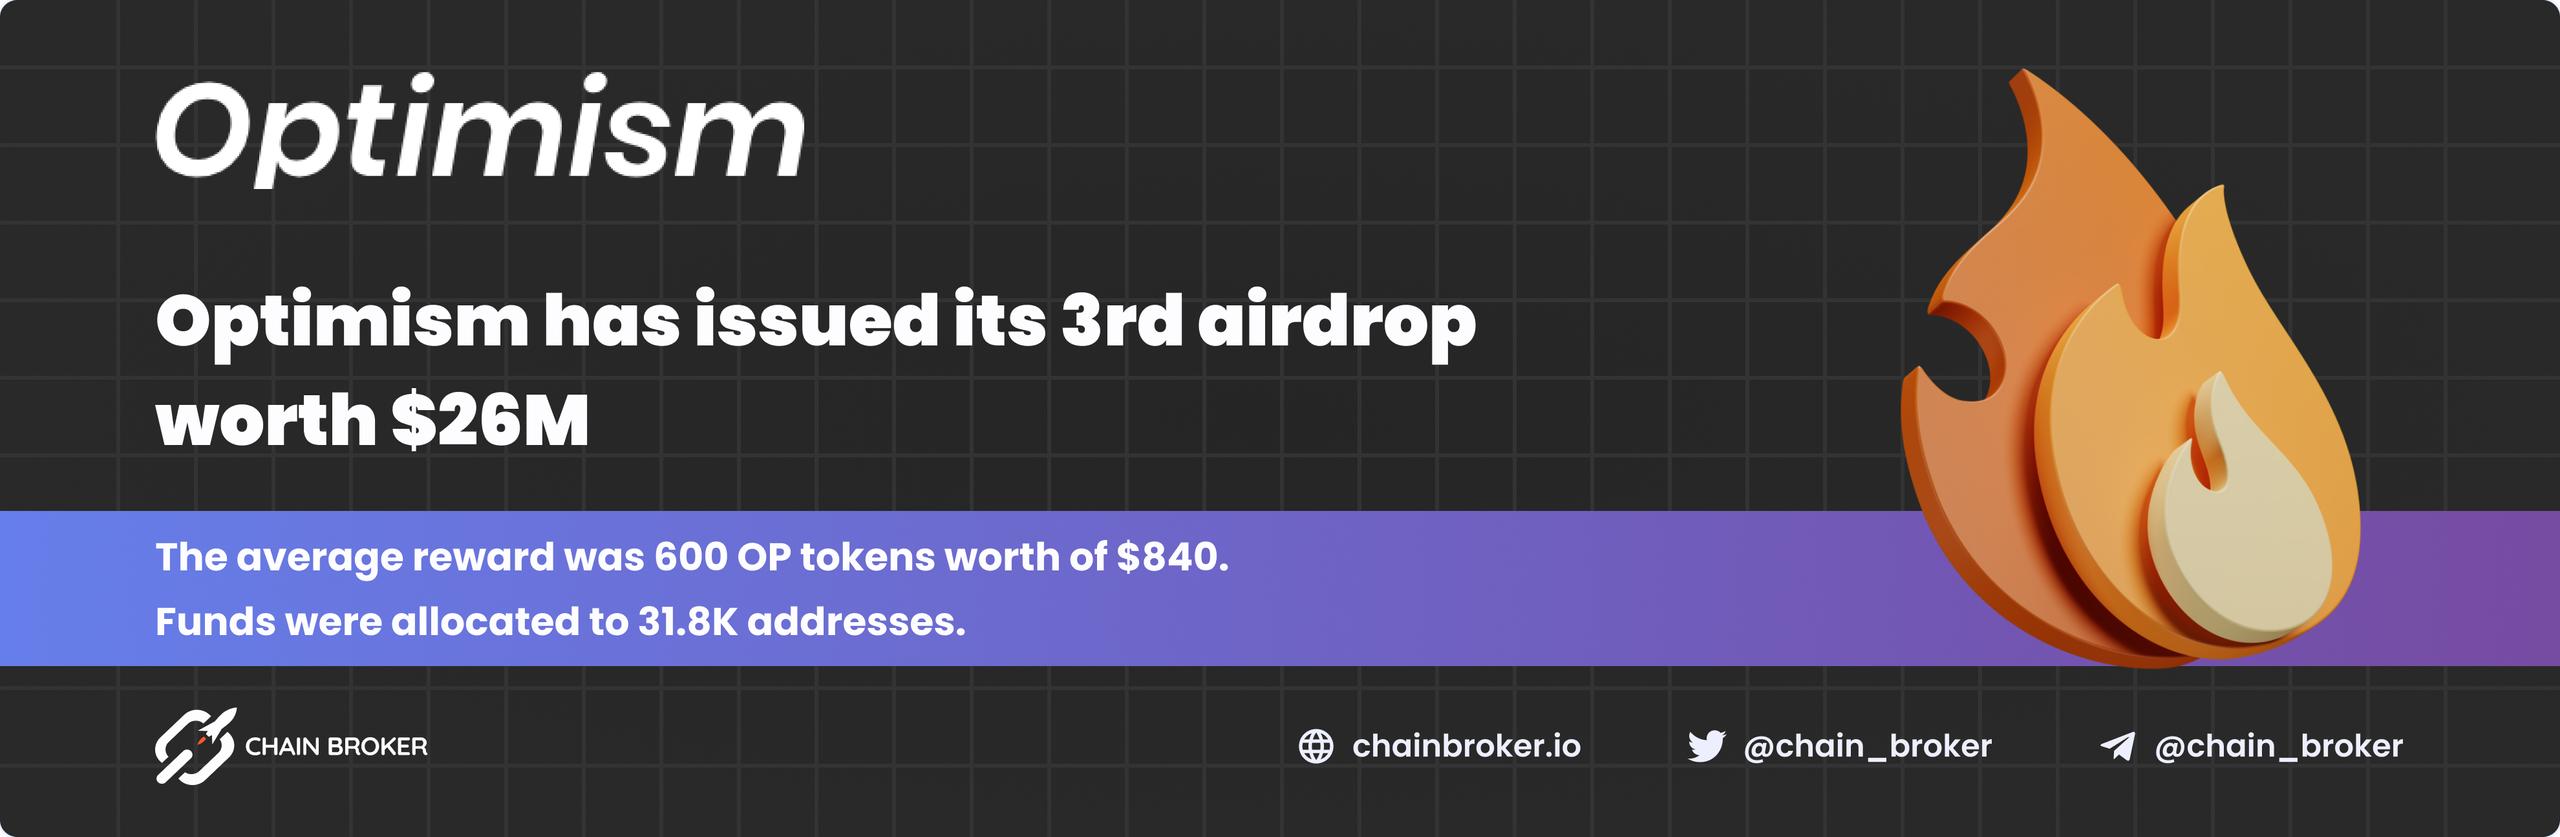 Optimism has issued its third airdrop worth $26M